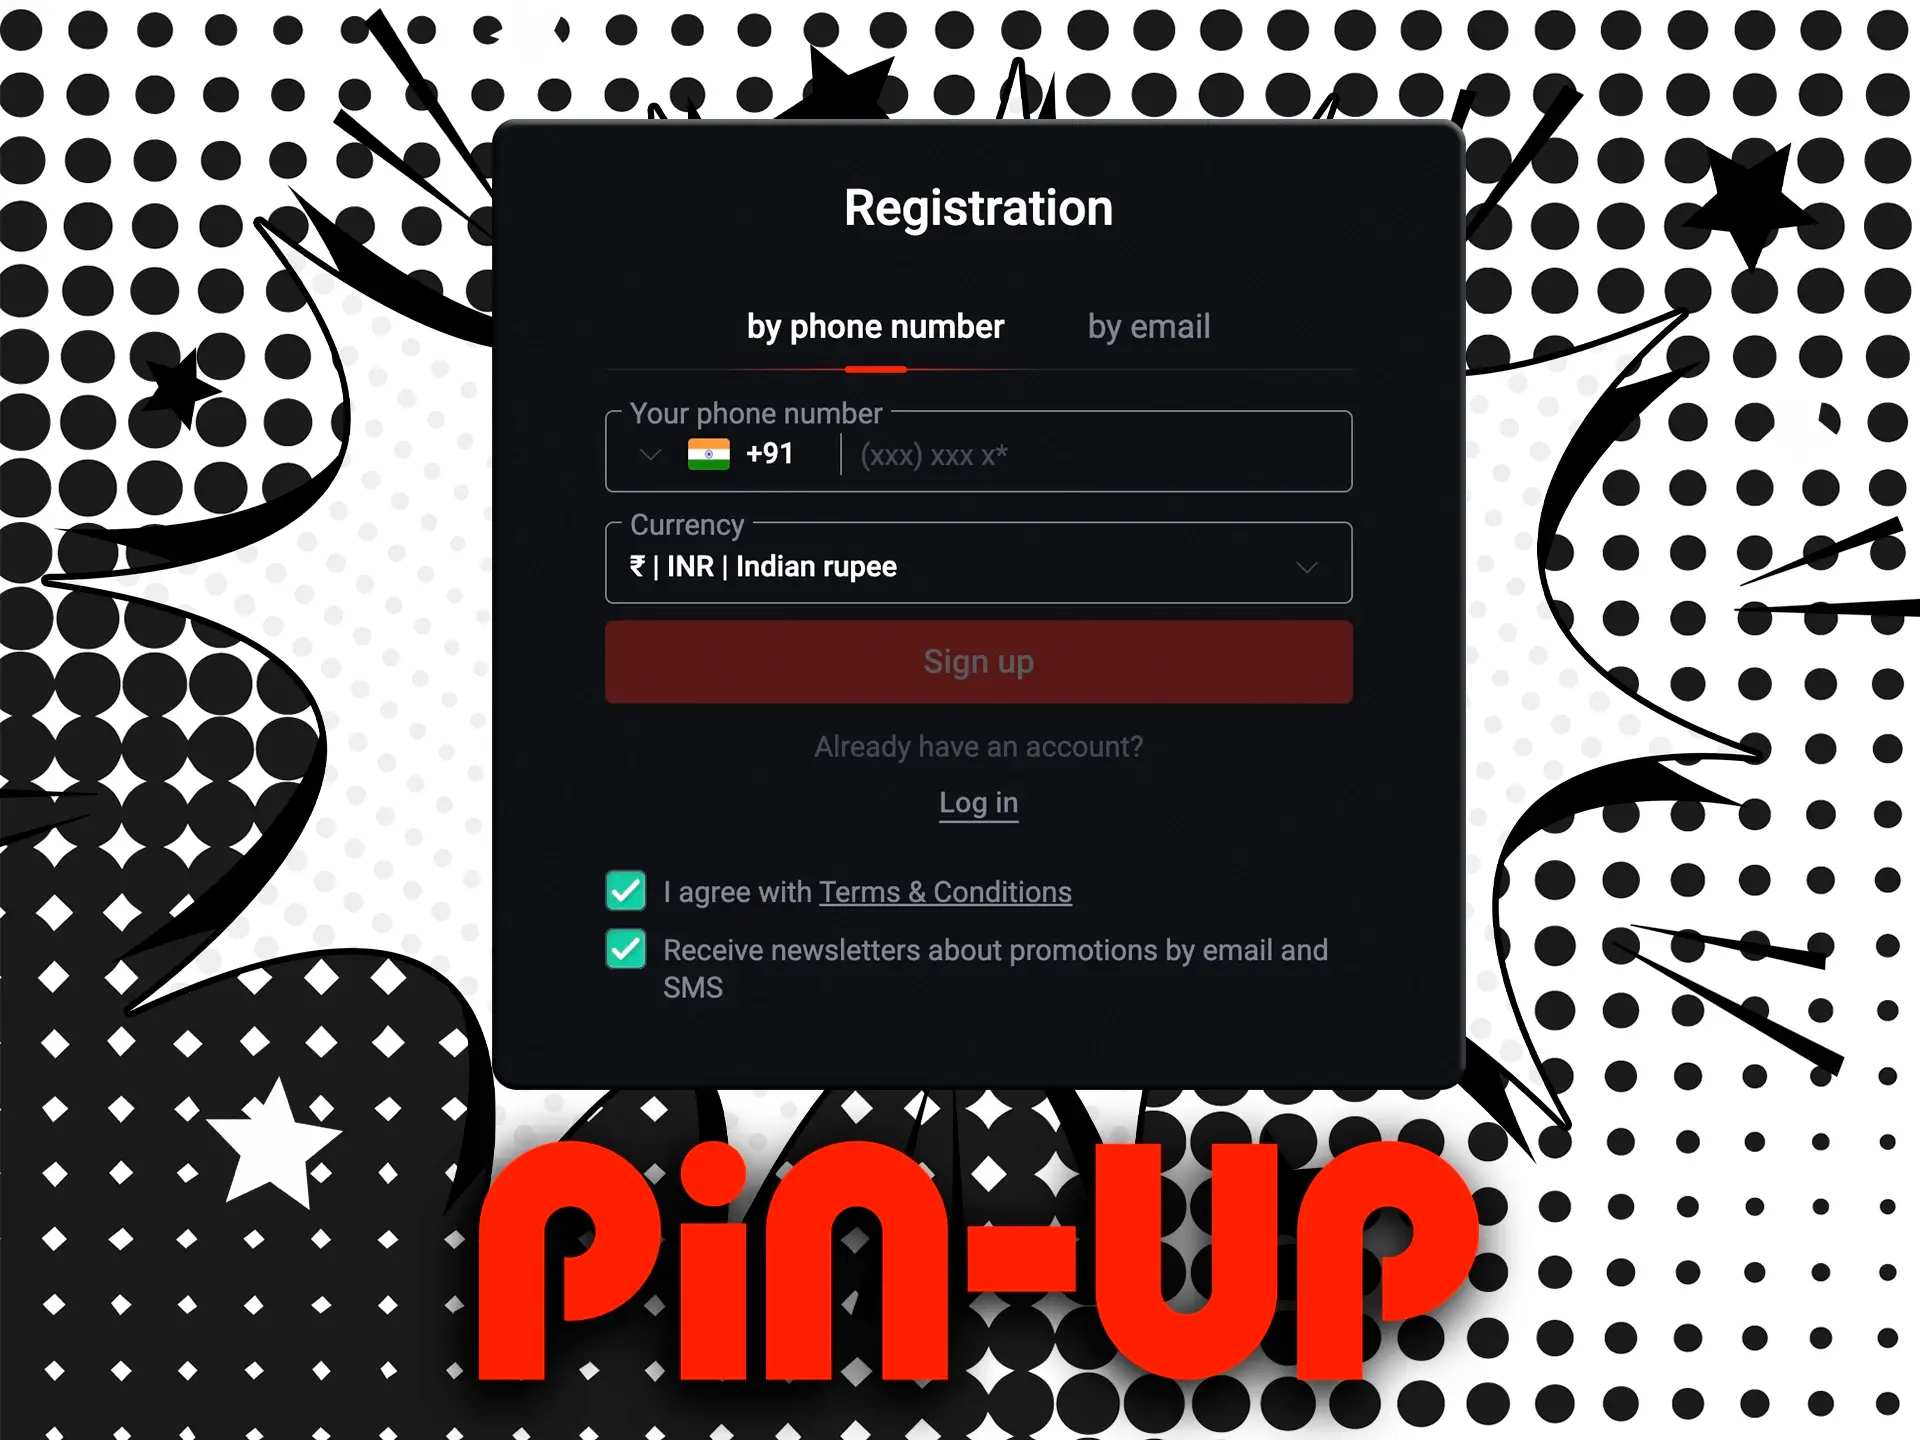 You can register in Pin Up with the help of your phone number or email.